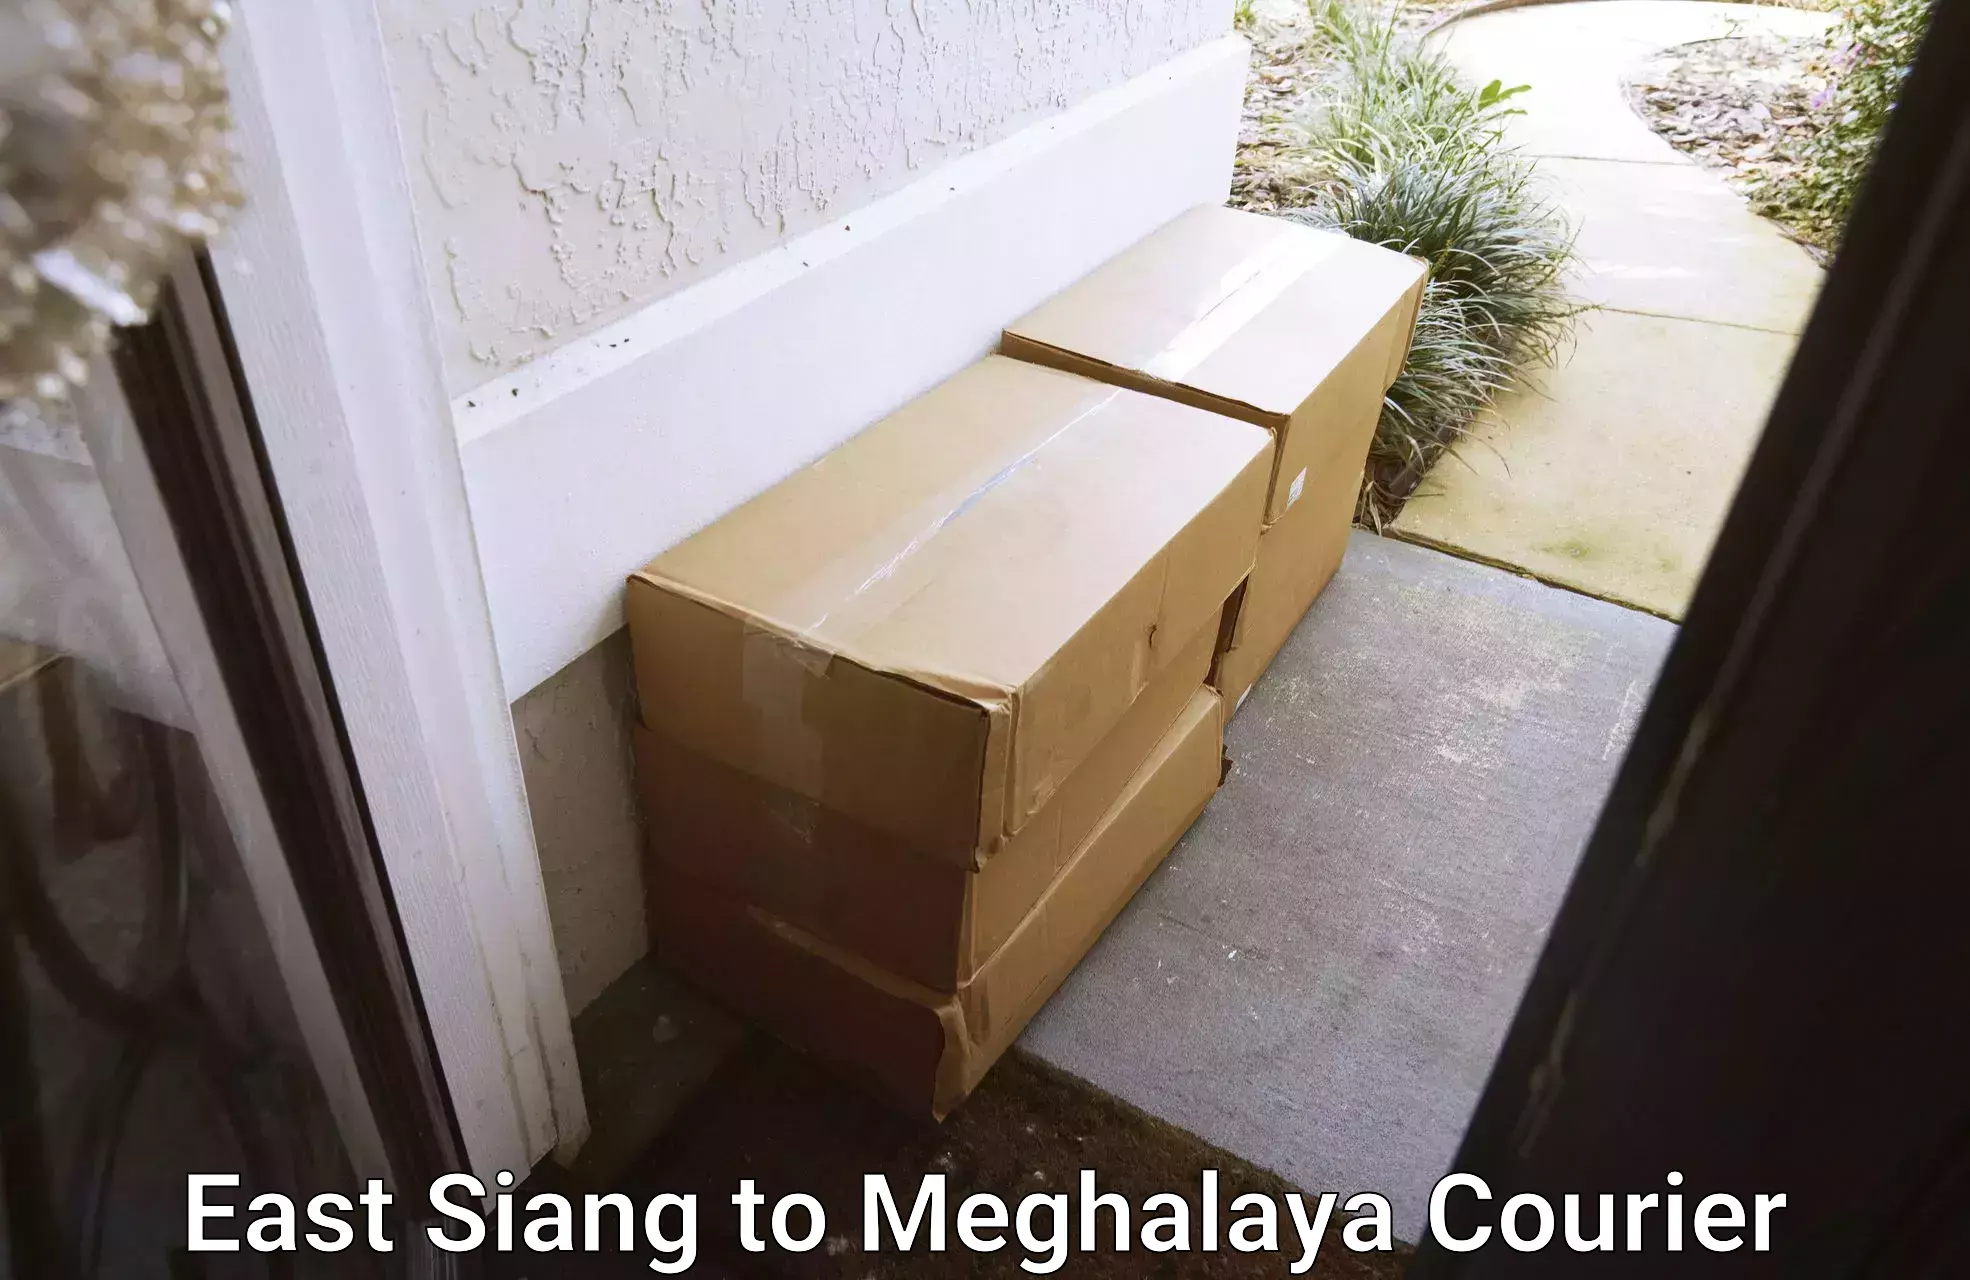 Reliable delivery network East Siang to Meghalaya